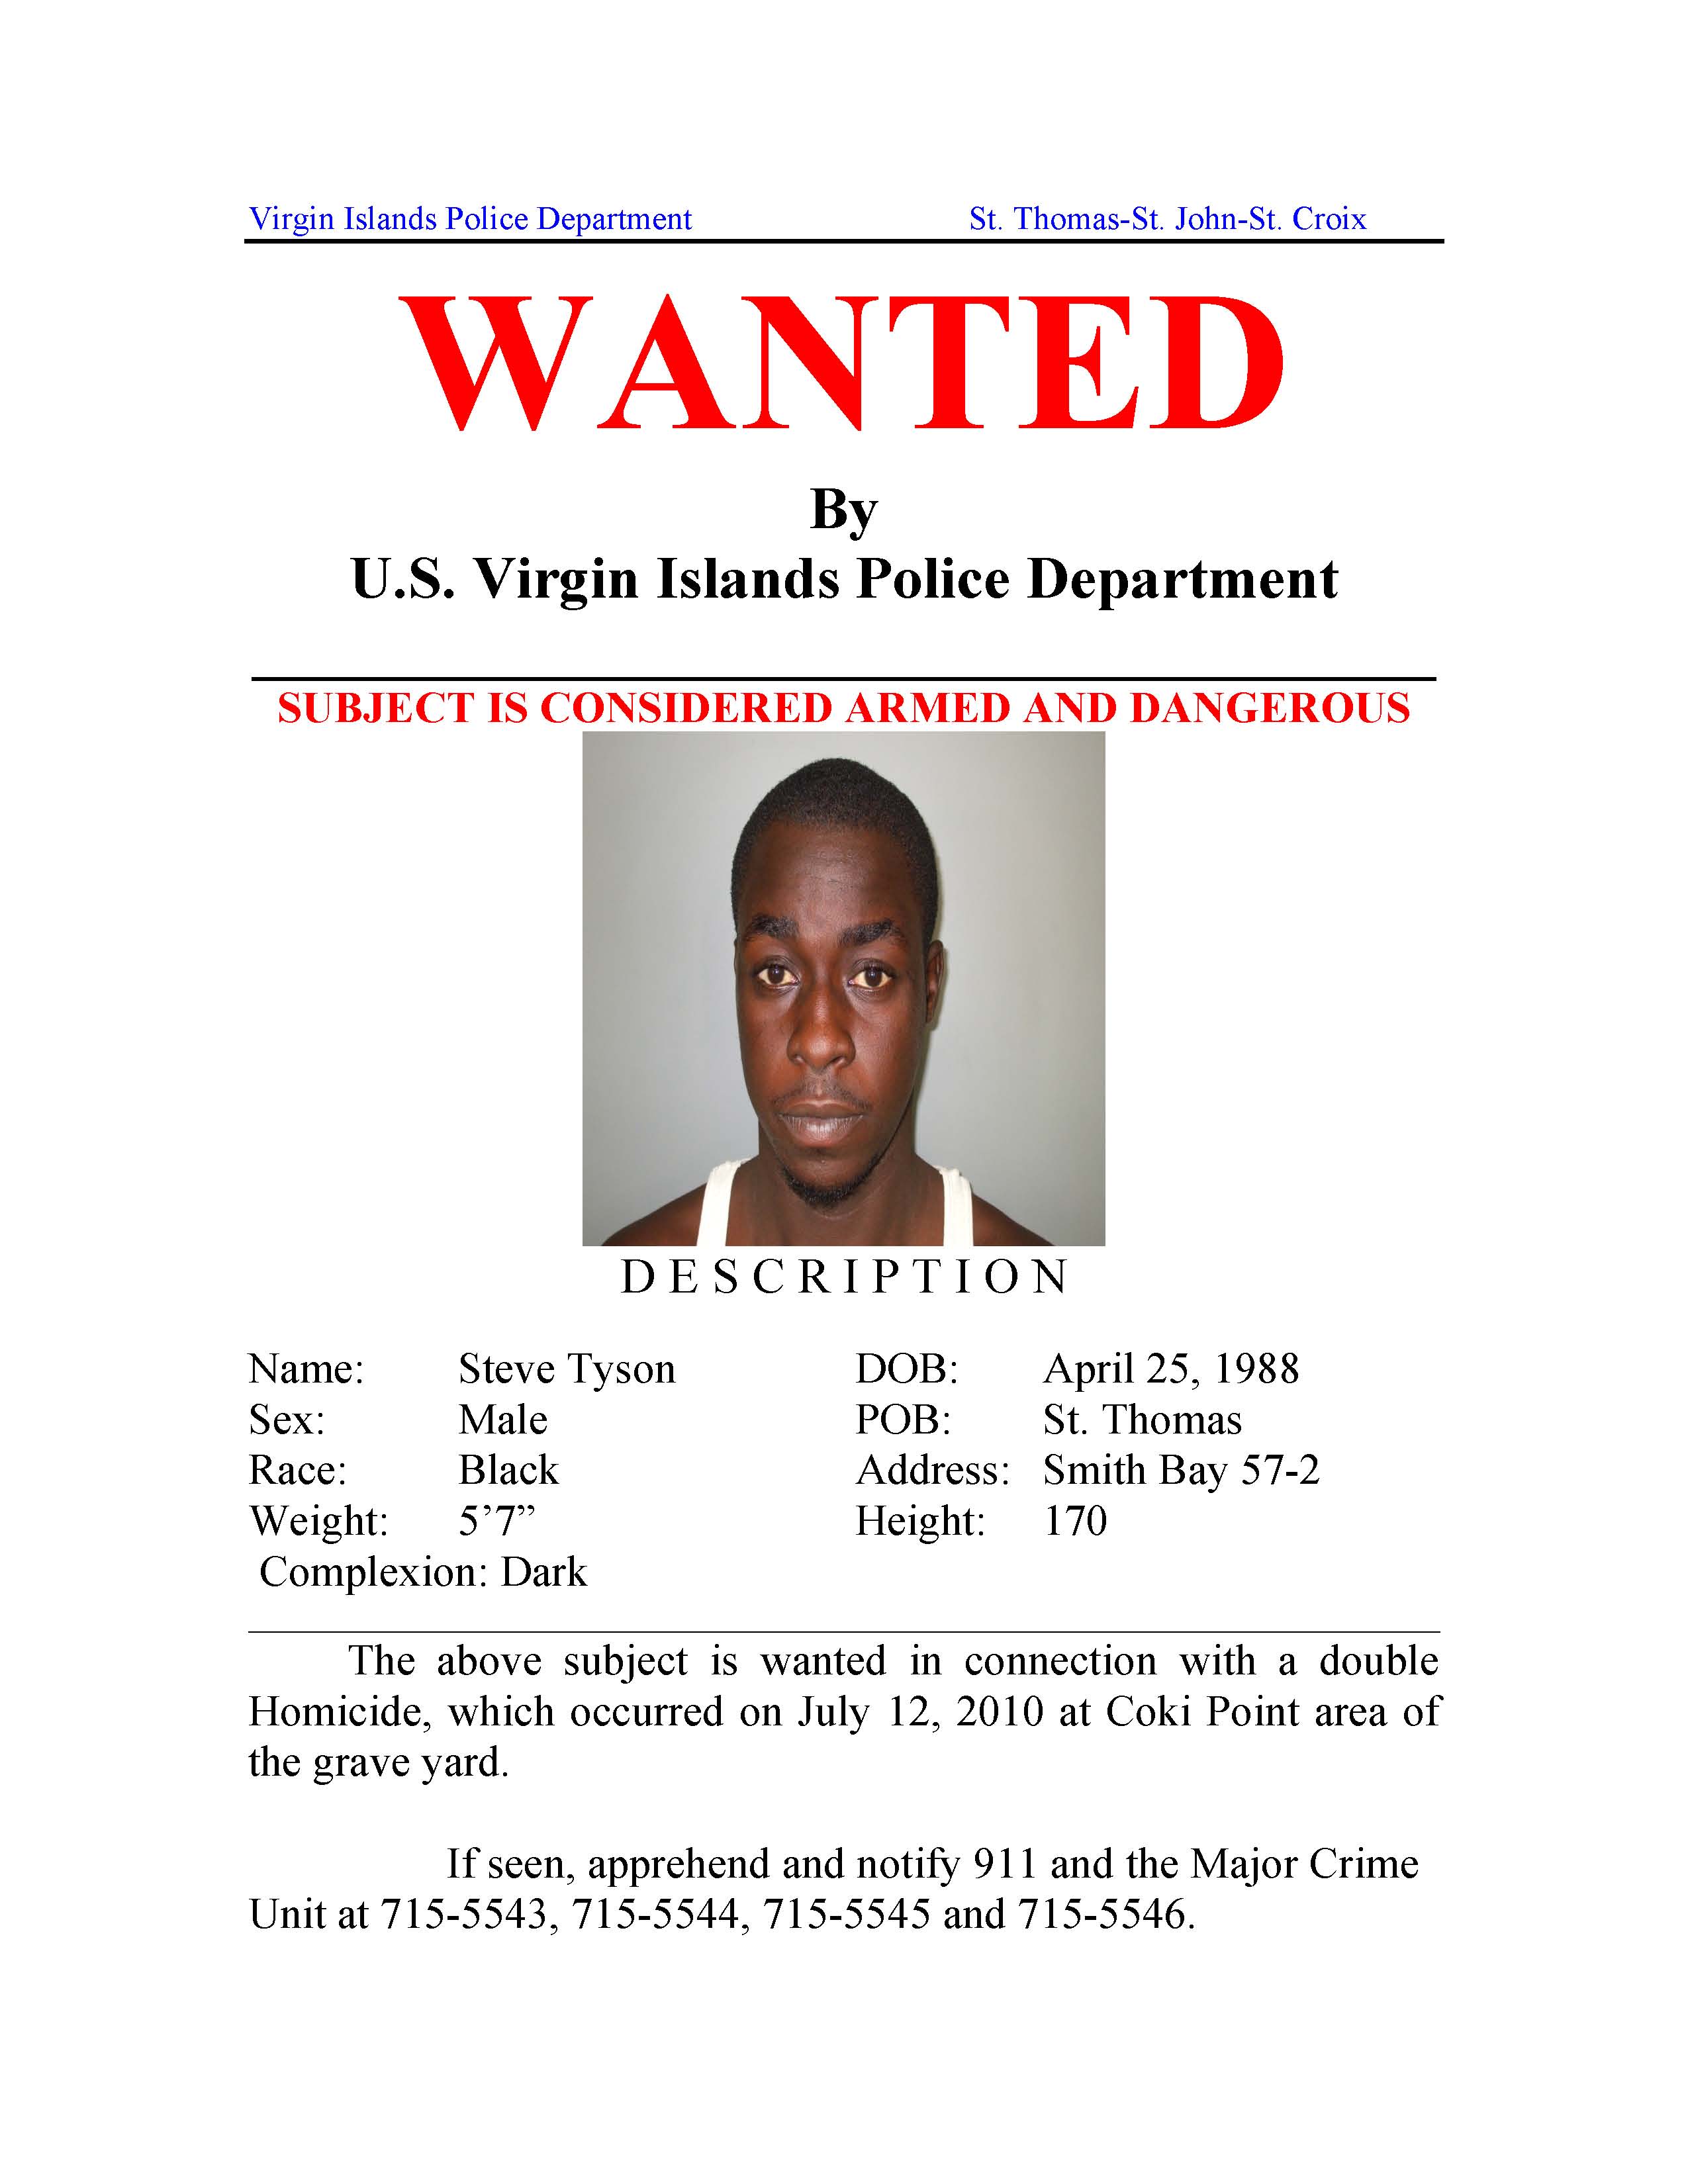 The wanted posted issued by VIPD for suspect Steve Tyson.